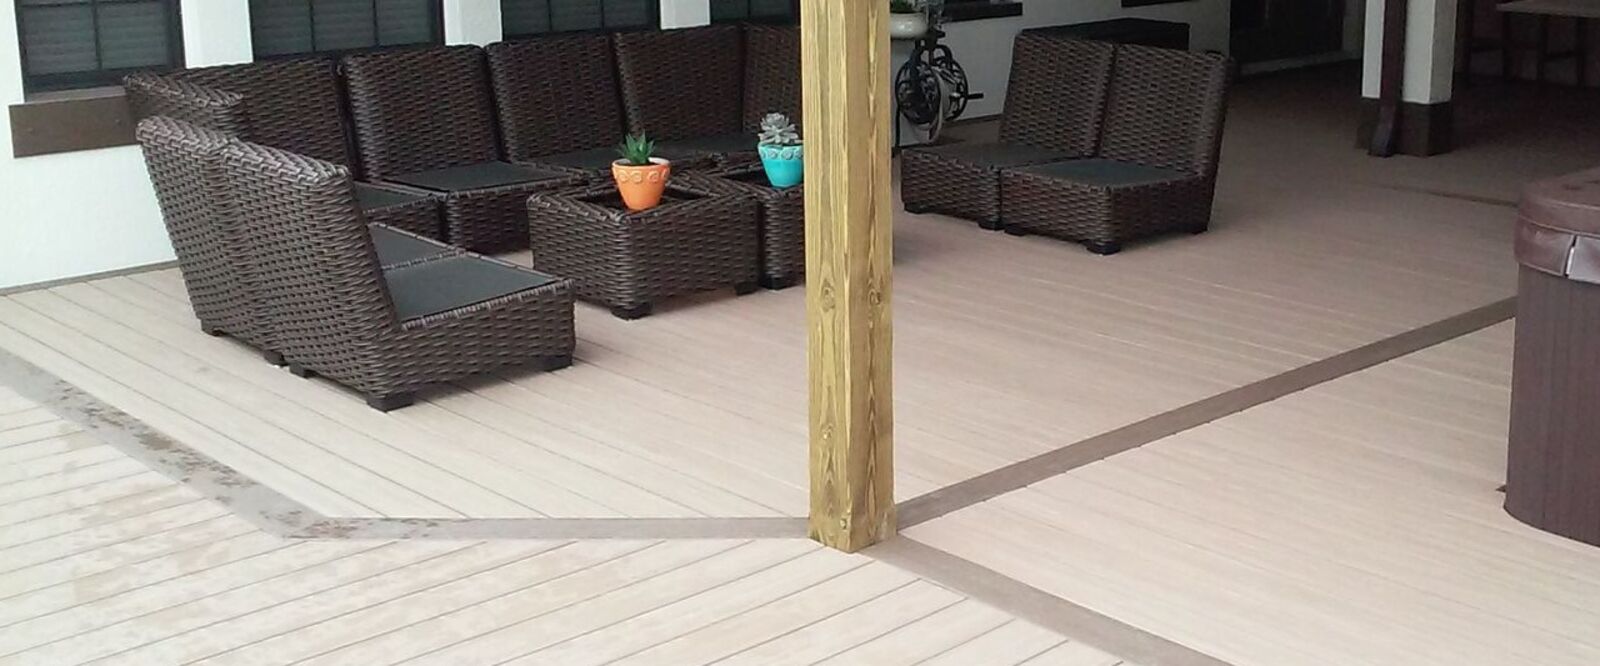 Multi-colored deck, tan and light brown